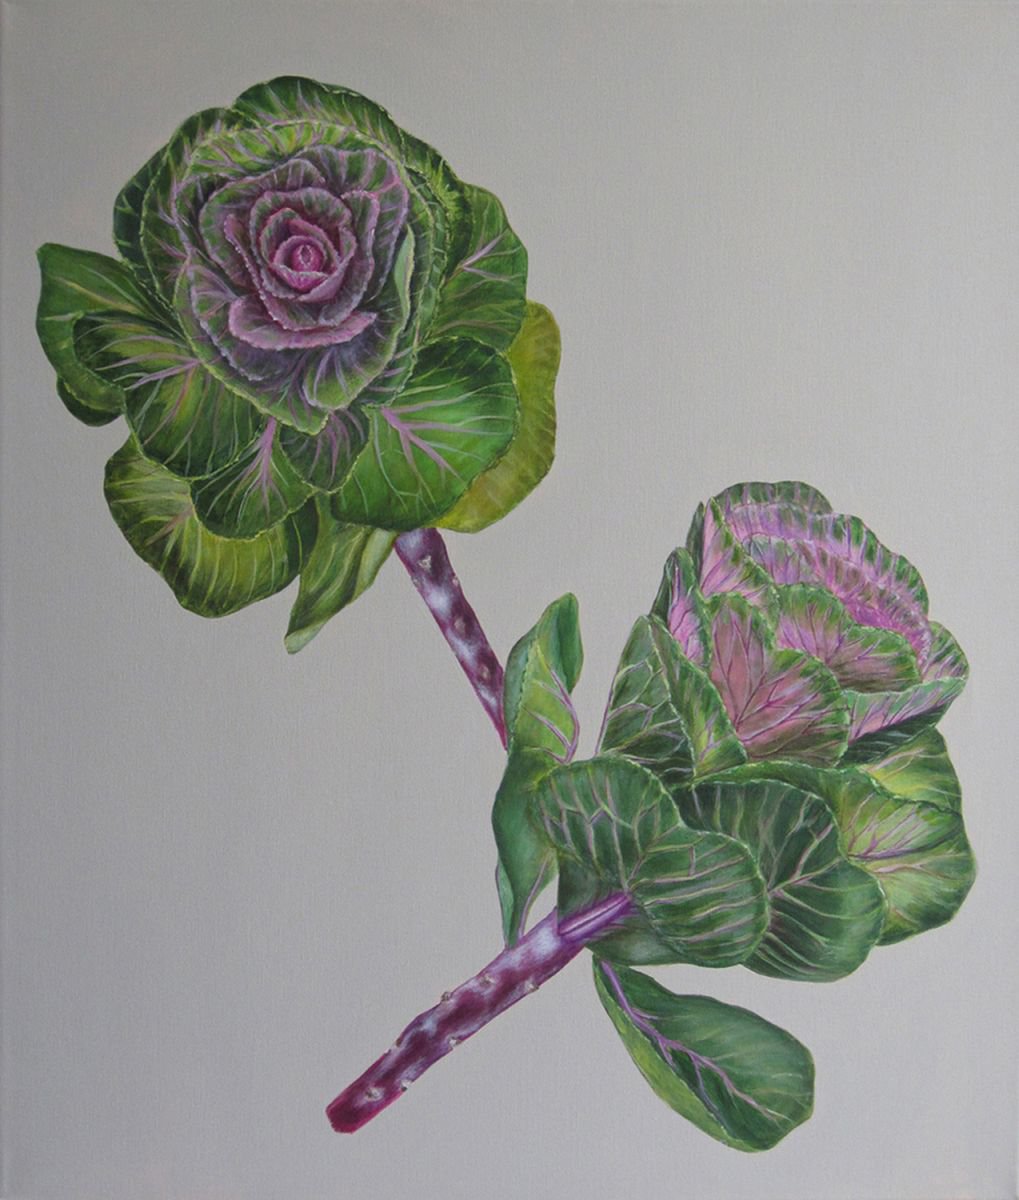 Ornamental Cabbages by Jacqueline Talbot